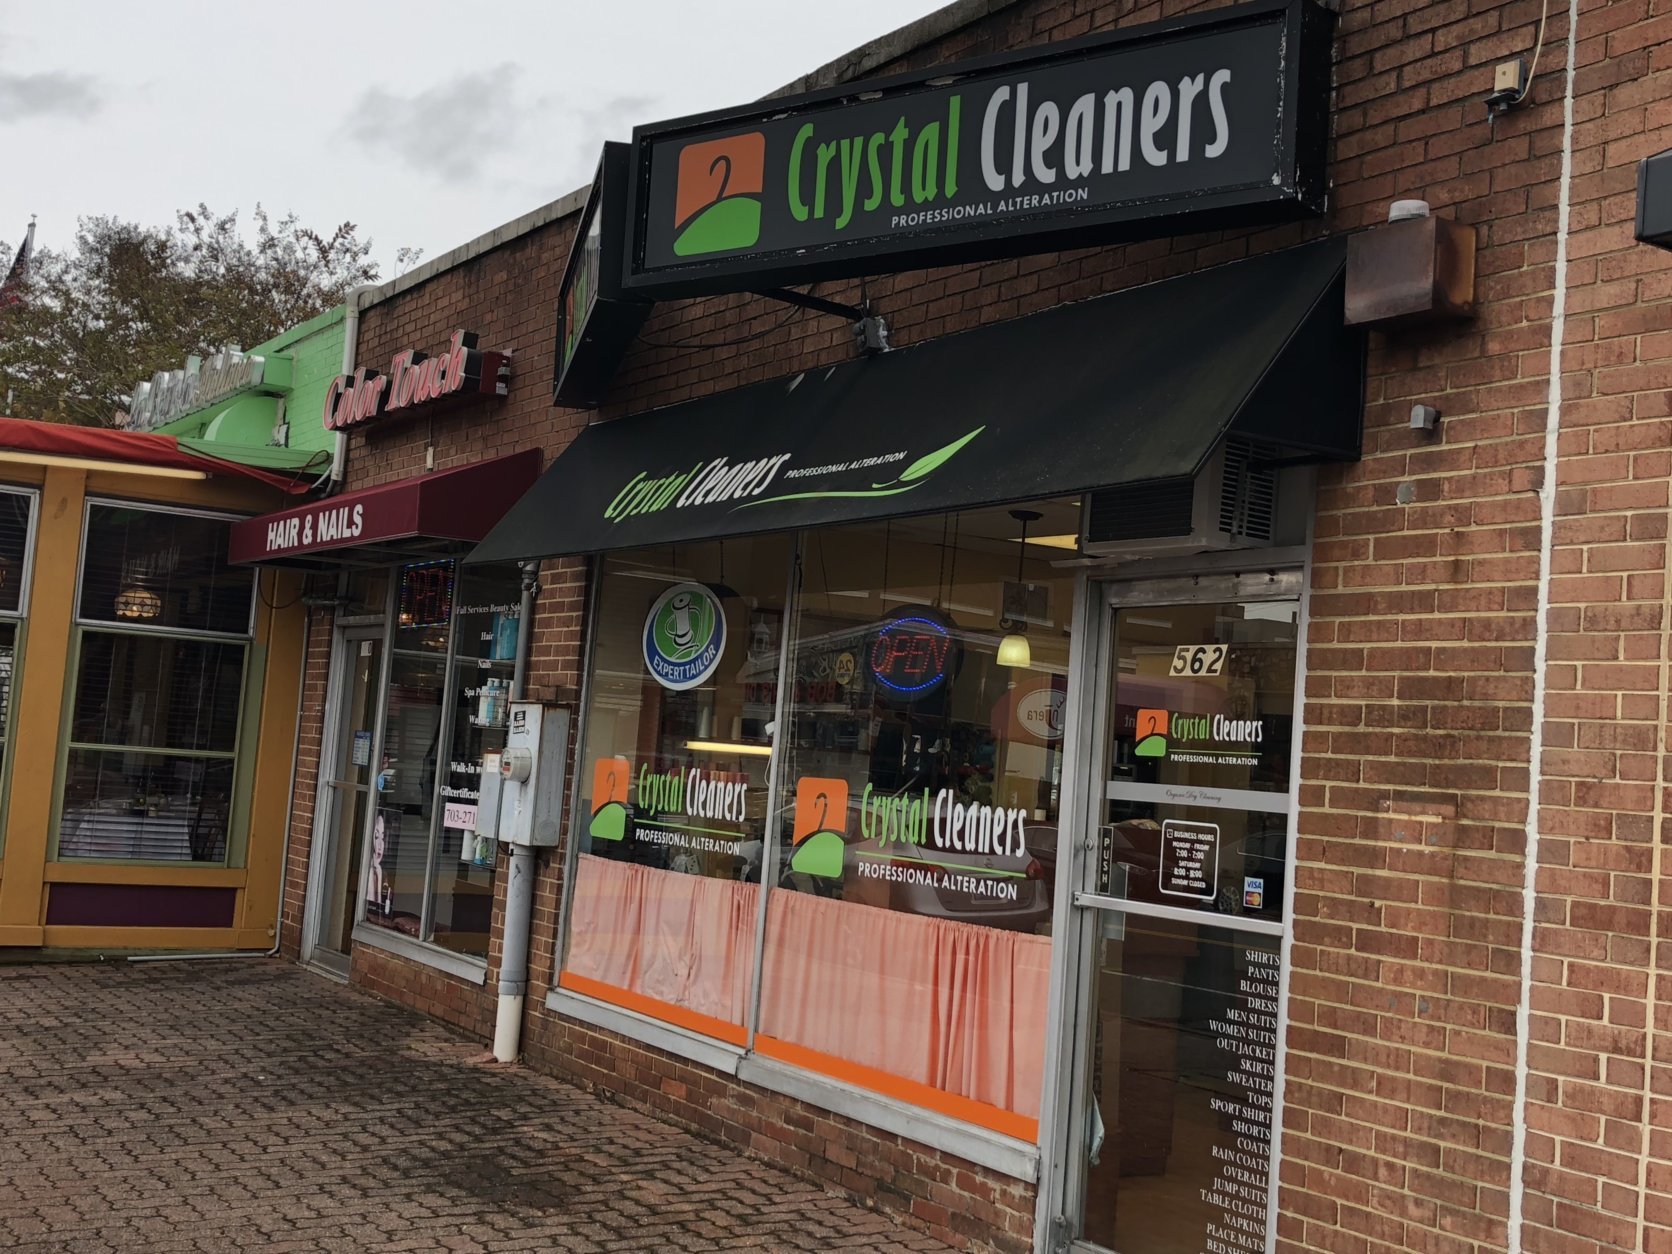 Crystal Cleaners in Crystal City. (WTOP/Melissa Howell)